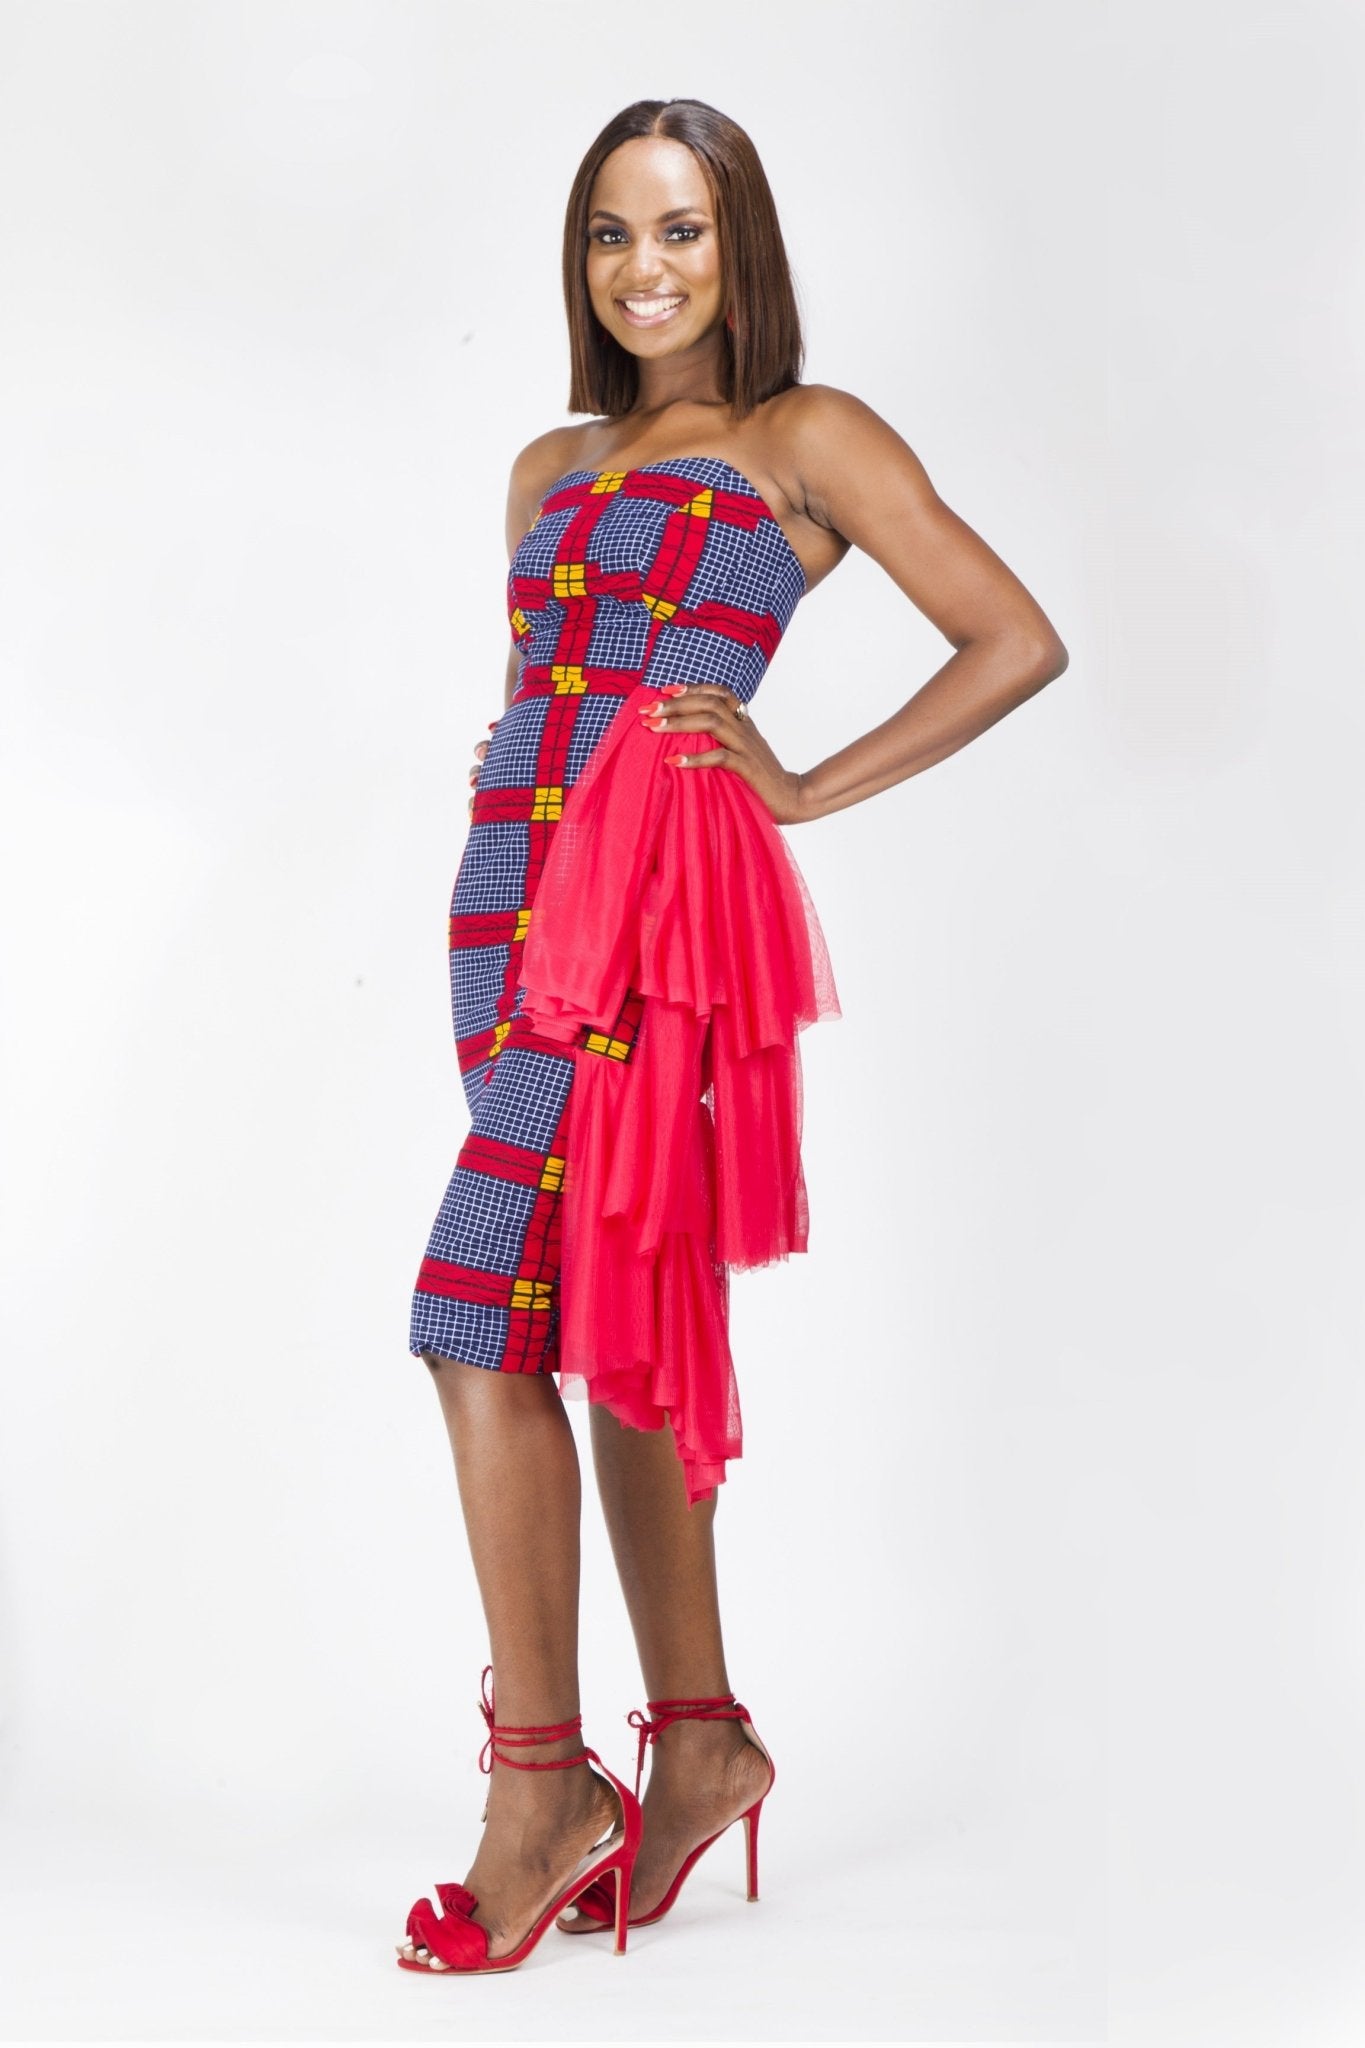 Black Red African Ankara Print Fitted Party Dress - Africanclothinghub UK, US, Canada